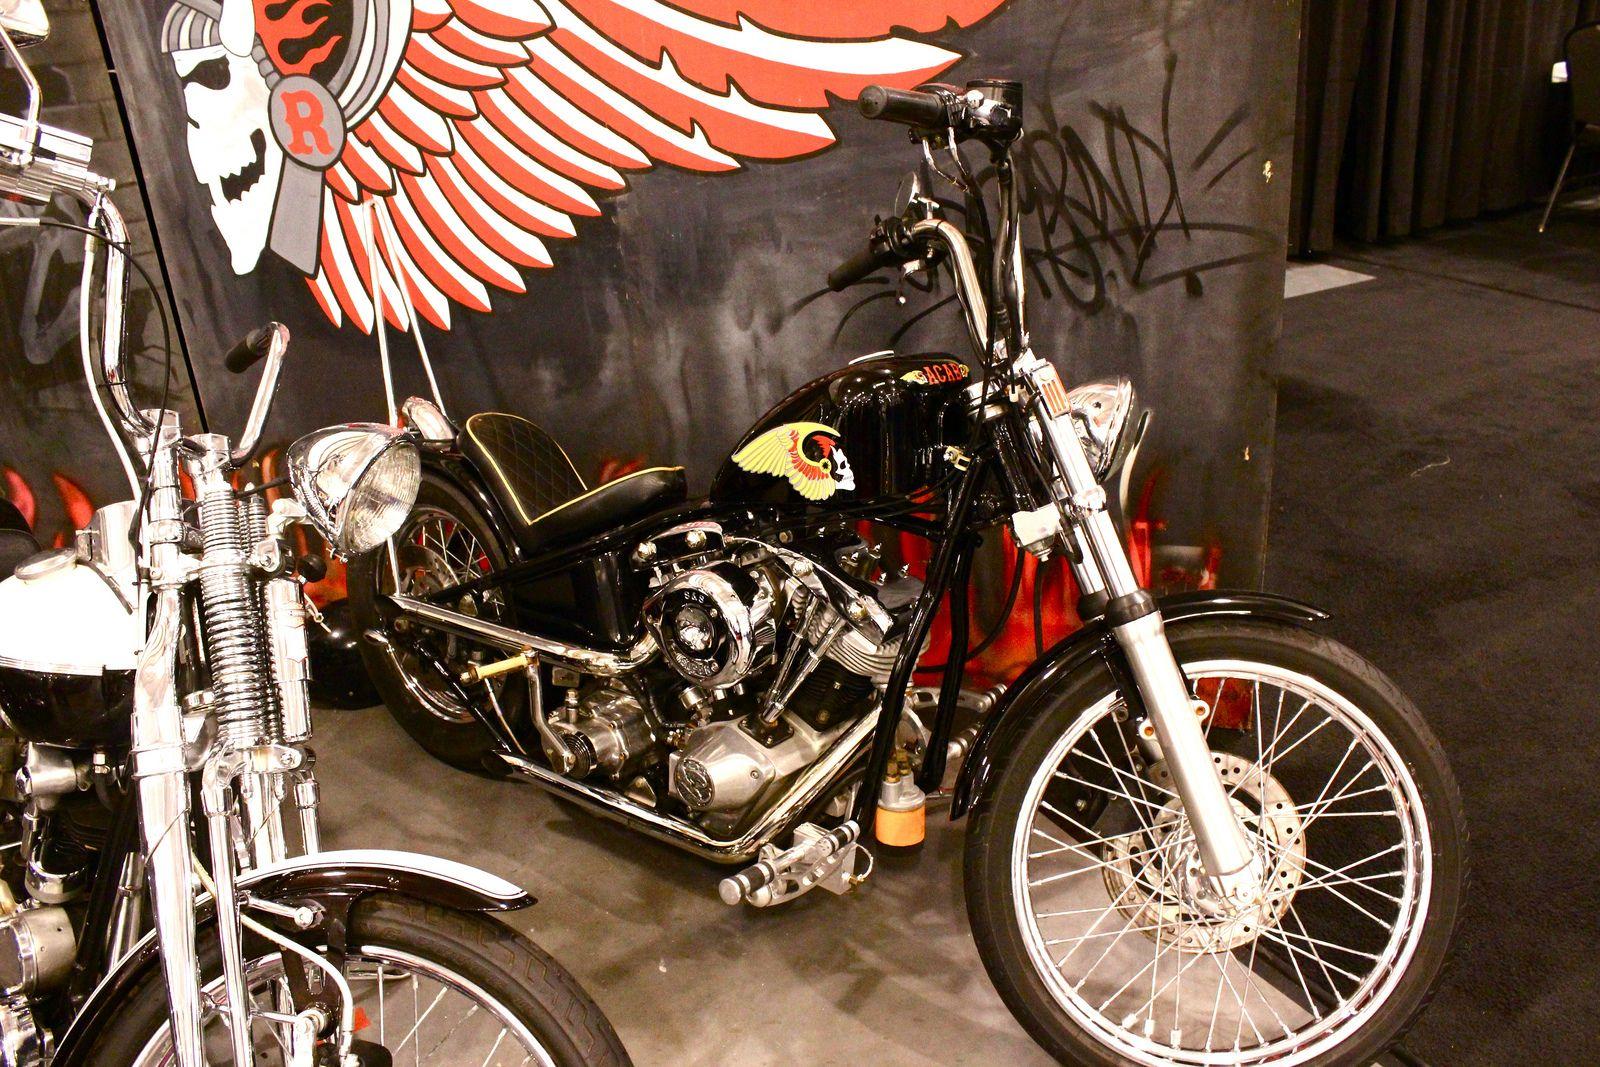 Hells Angel Chariot Wallpapers and Backgrounds Image.